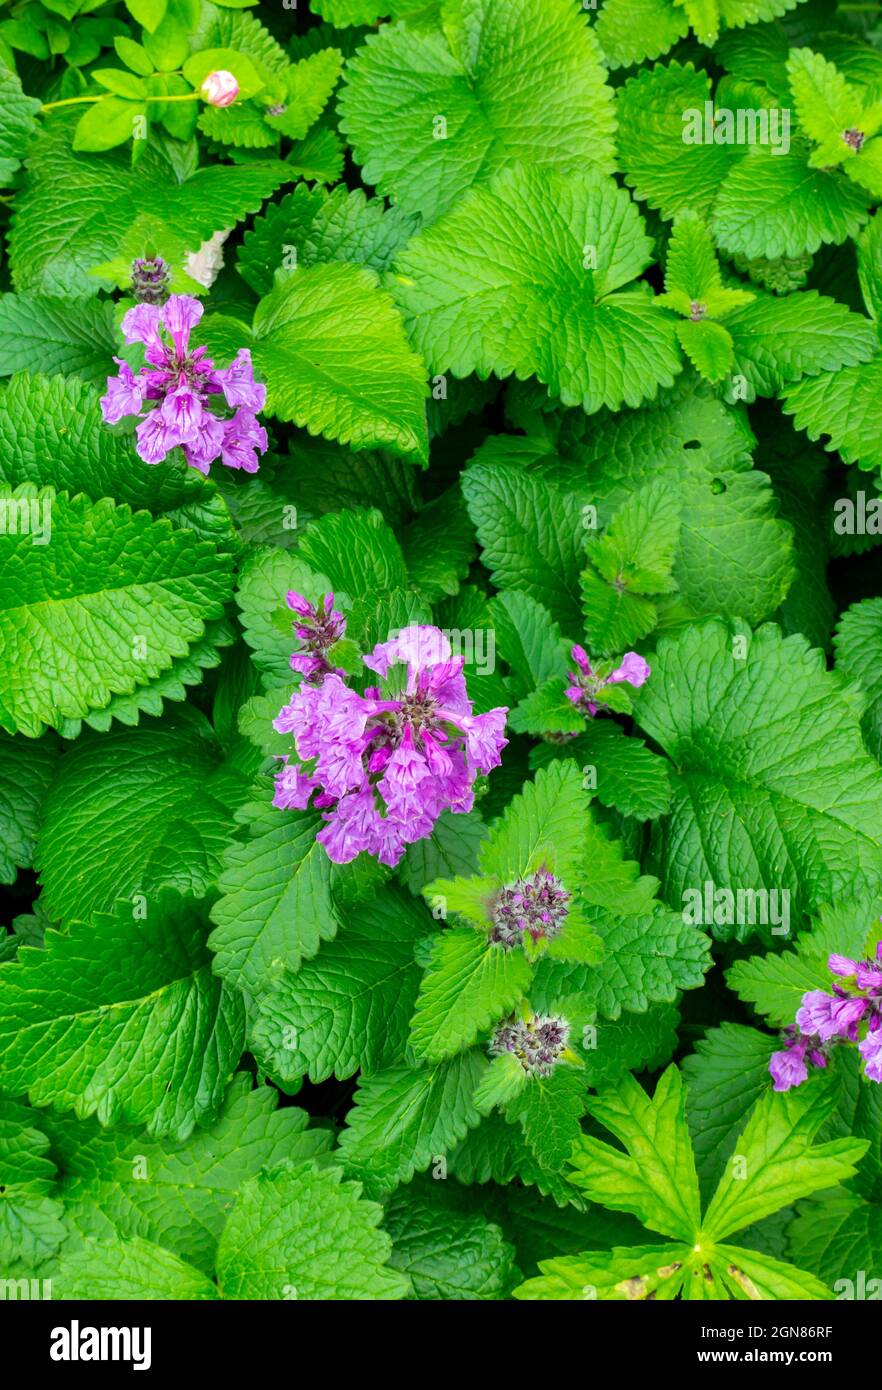 Verbena plant a genus in the family Verbenaceae. It contains about 150 species of annual and perennial herbaceous or semi-woody flowering plants. Stock Photo